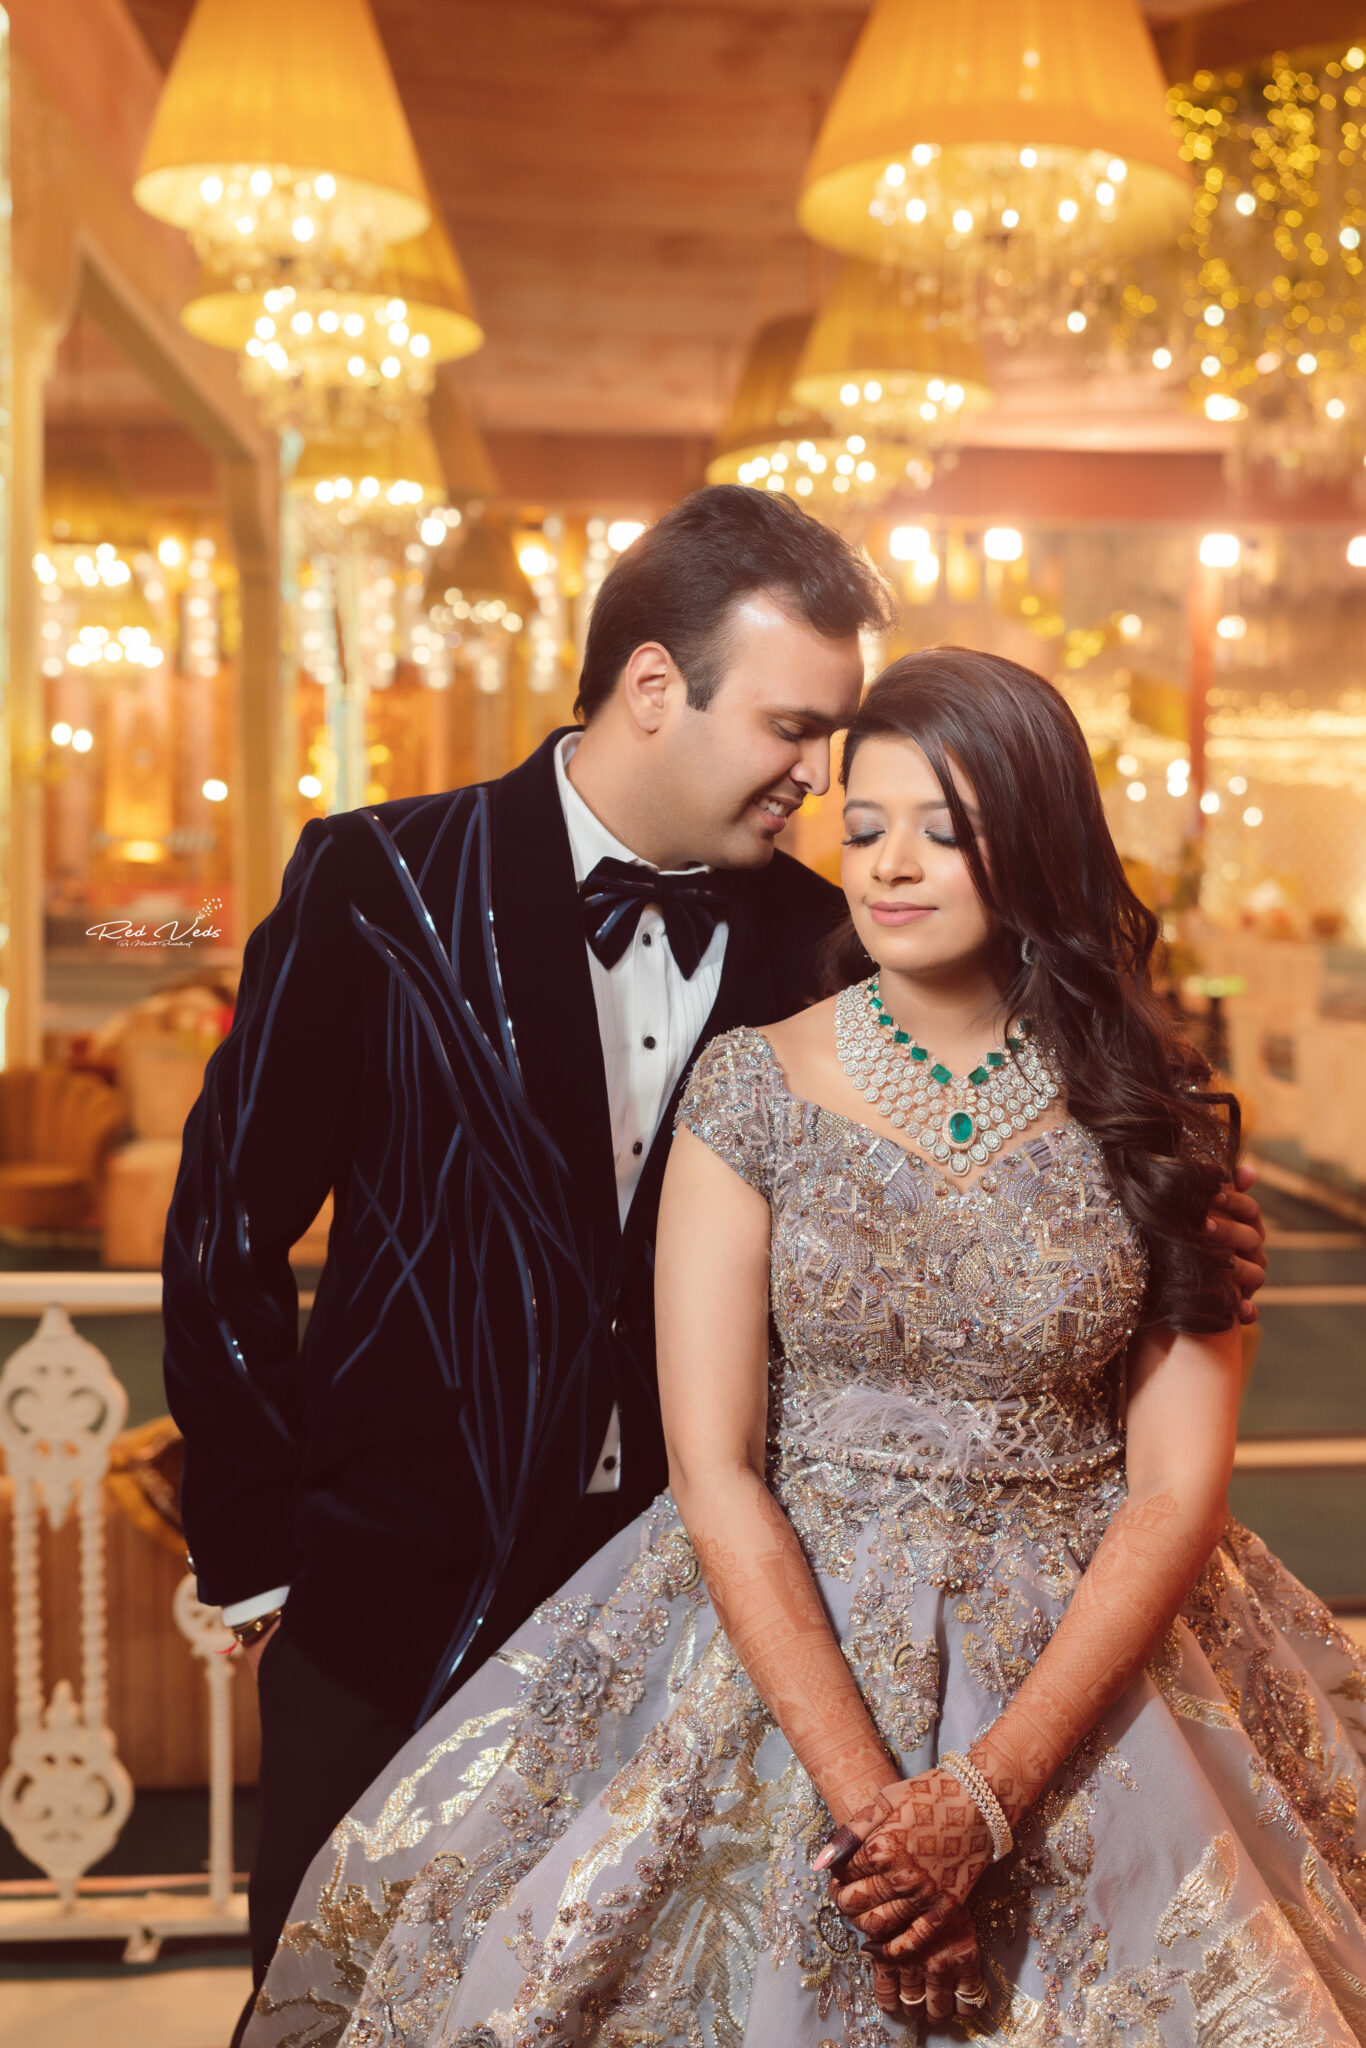 Innovative Indian Wedding Couple Photography Poses You Must Try -  LooksGud.com | Indian bride photography poses, Indian wedding couple  photography, Indian wedding poses